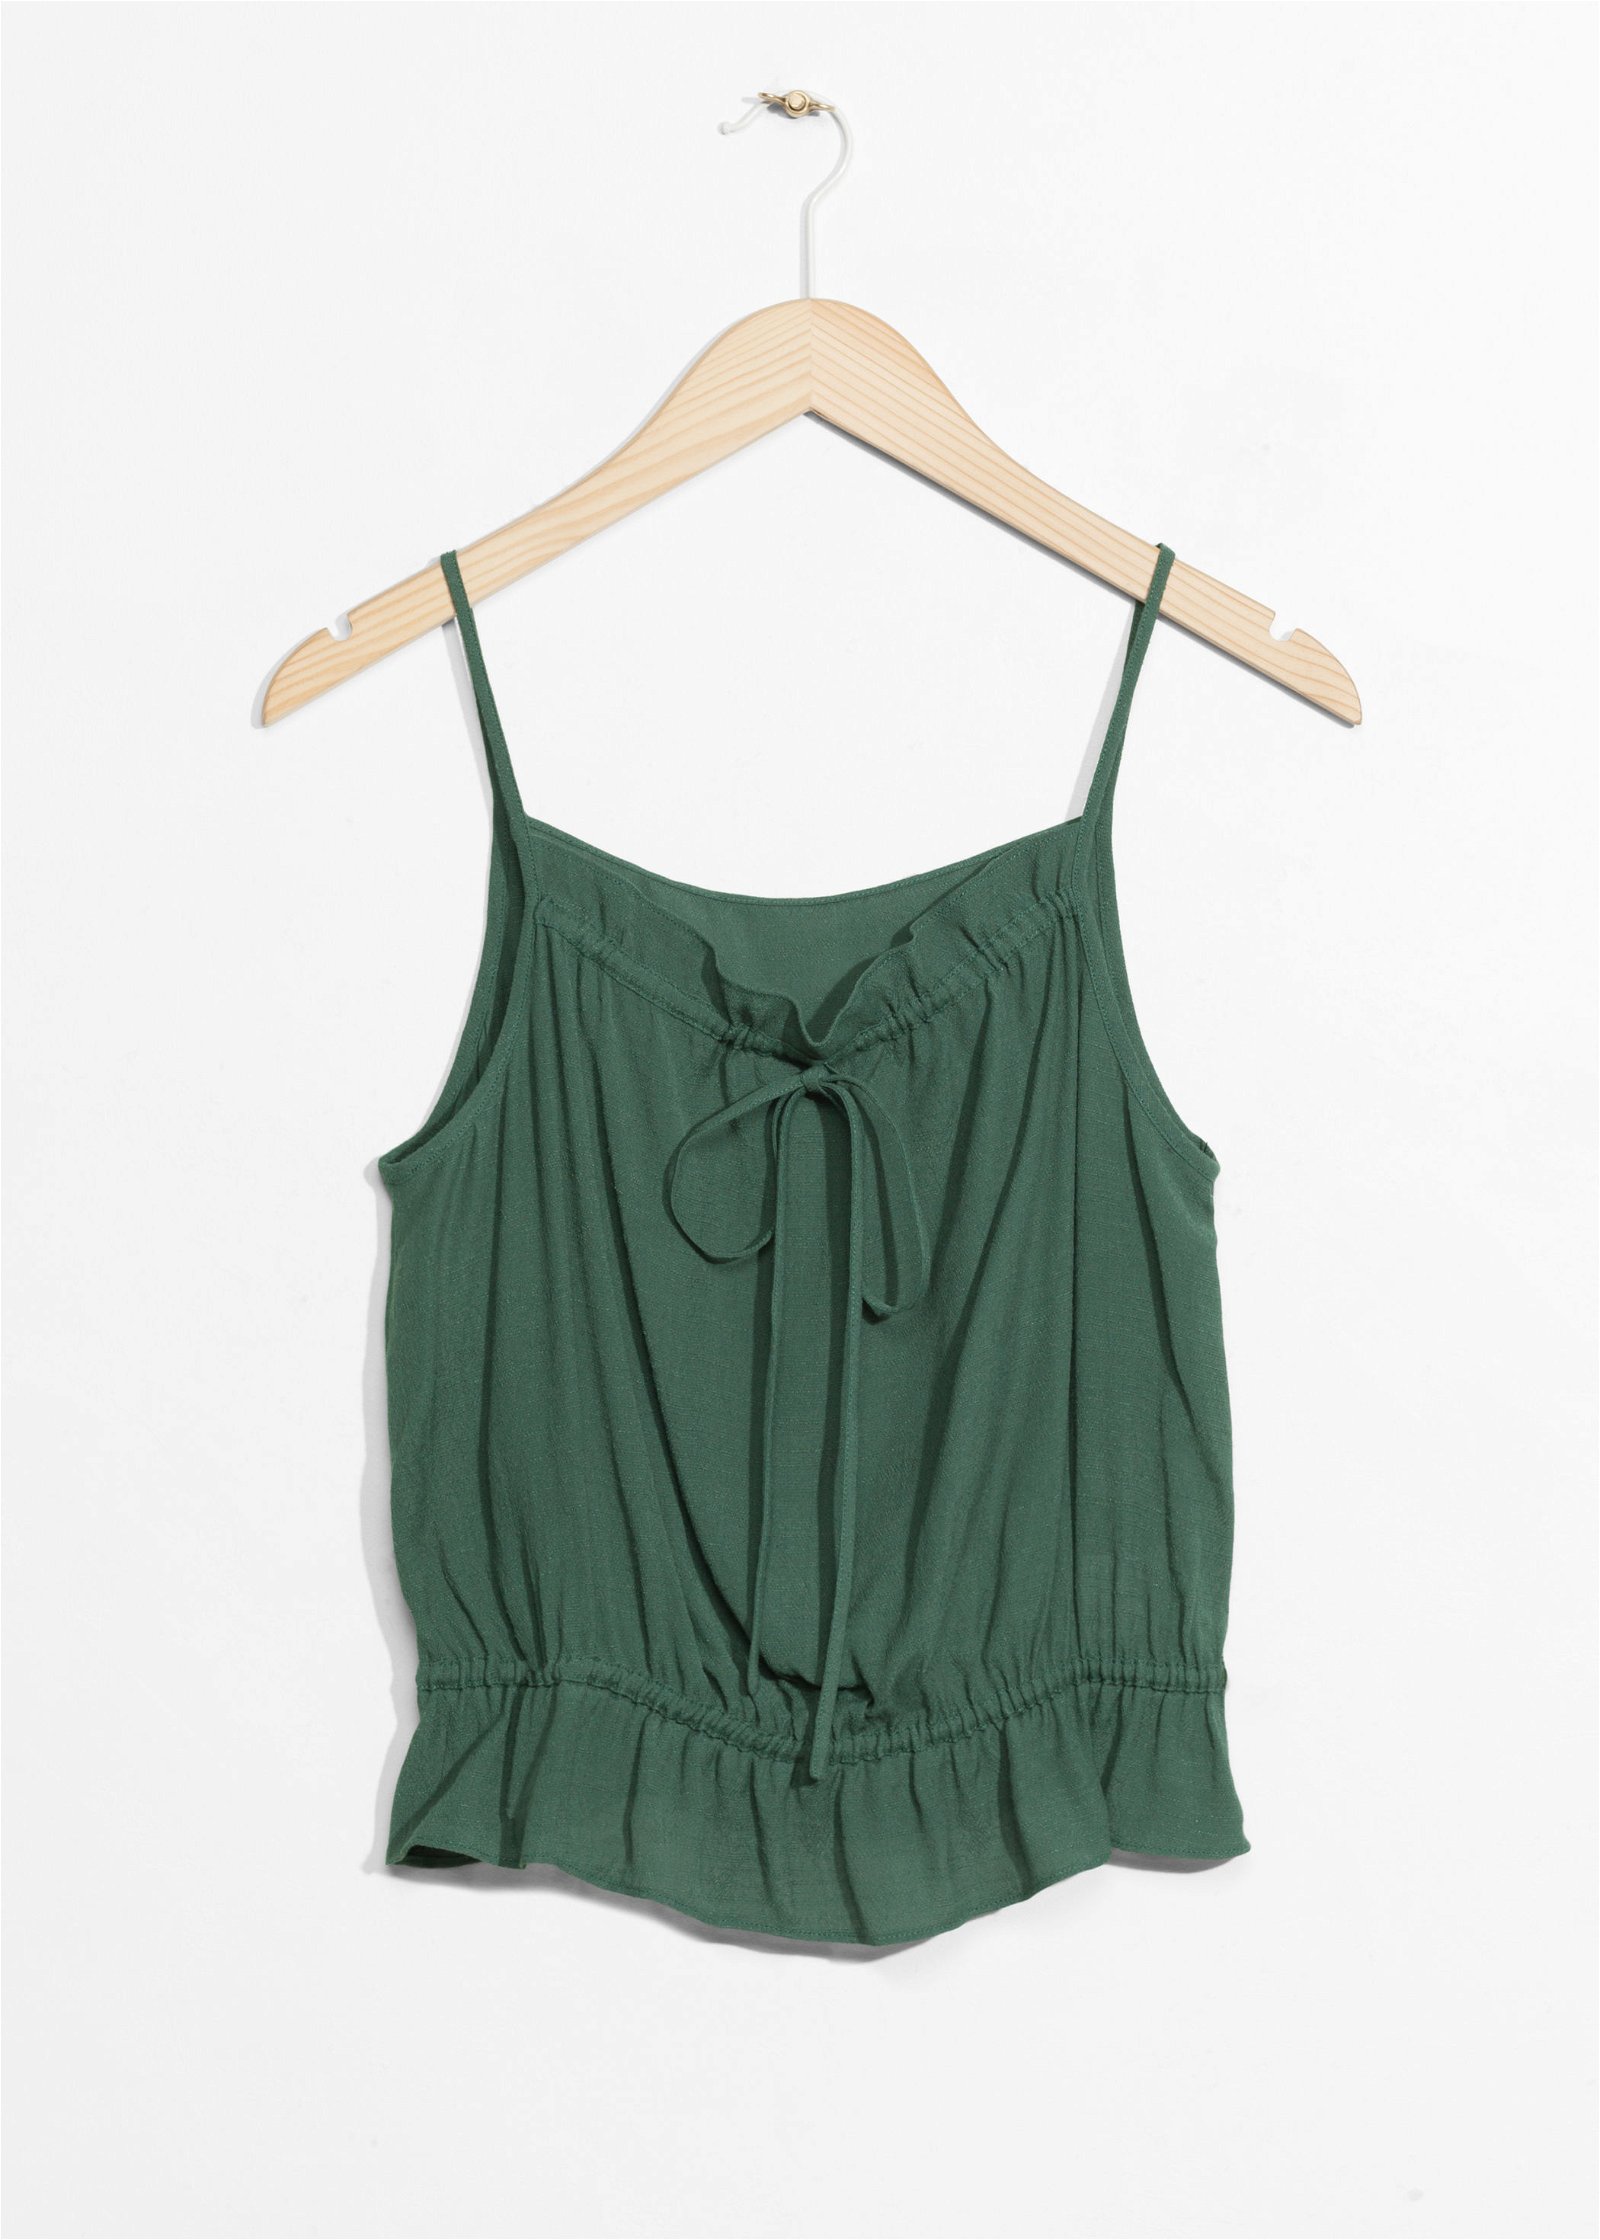 & OTHER STORIES Gathered Strap Top | Endource